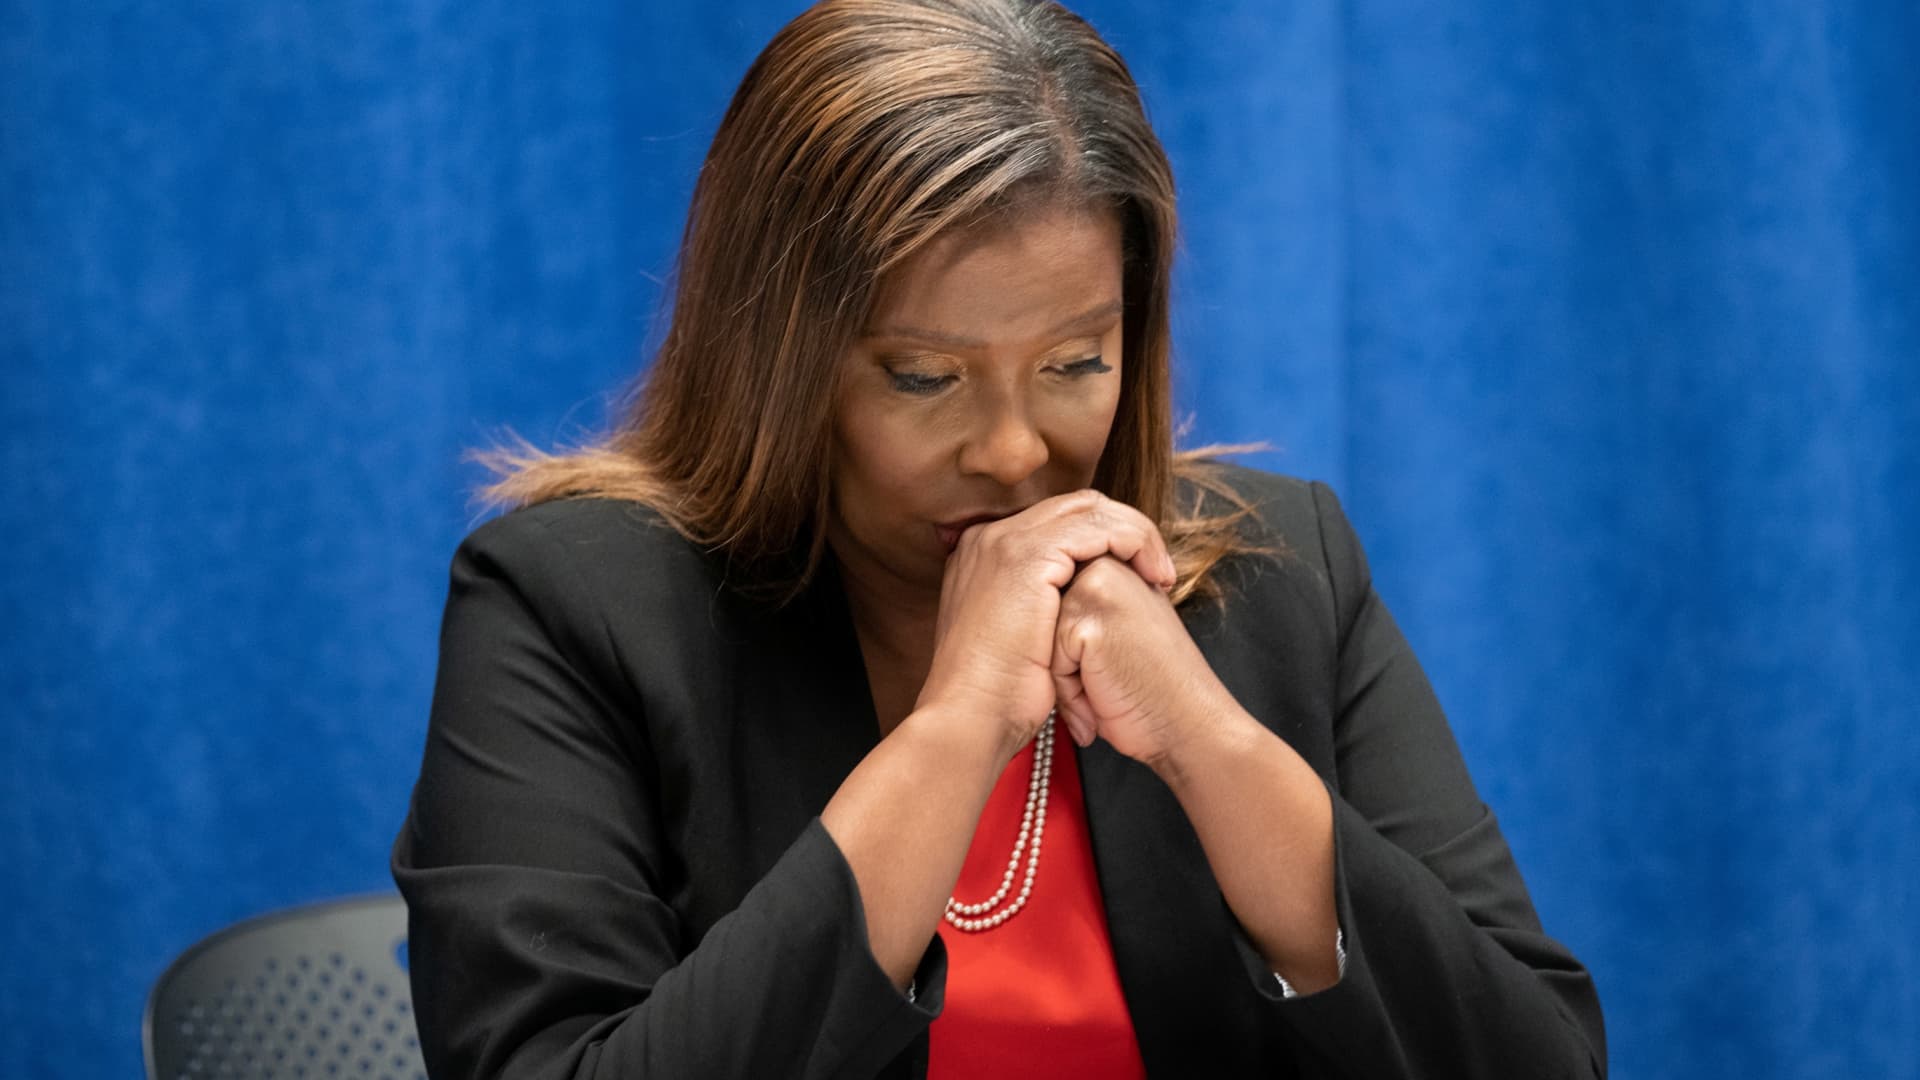 New York State Attorney General, Letitia James, listens to independent investigators Joon H. Kim and Anne L. Clark (not pictured) during a news conference regarding a probe that found New York Governor Andrew Cuomo sexually harassed multiple women, in New York, August 3, 2021.